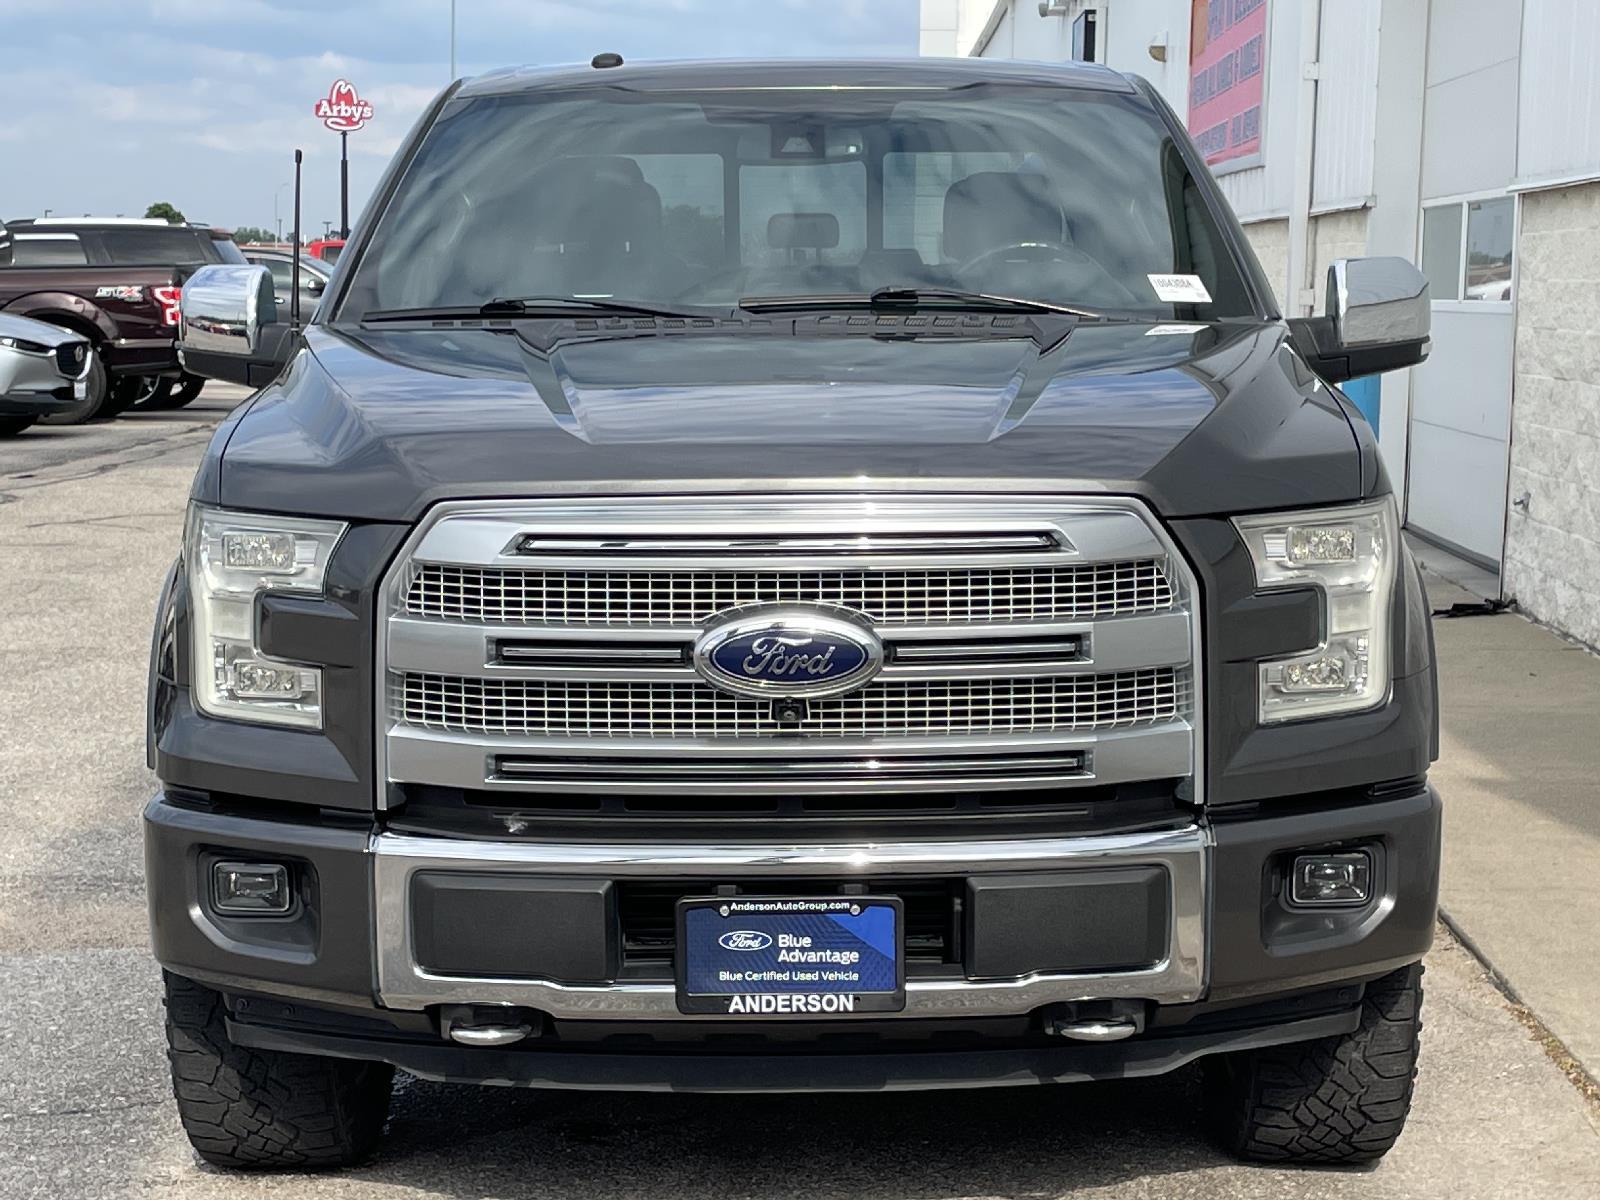 Used 2017 Ford F-150 Platinum Crew Cab Truck for sale in Lincoln NE